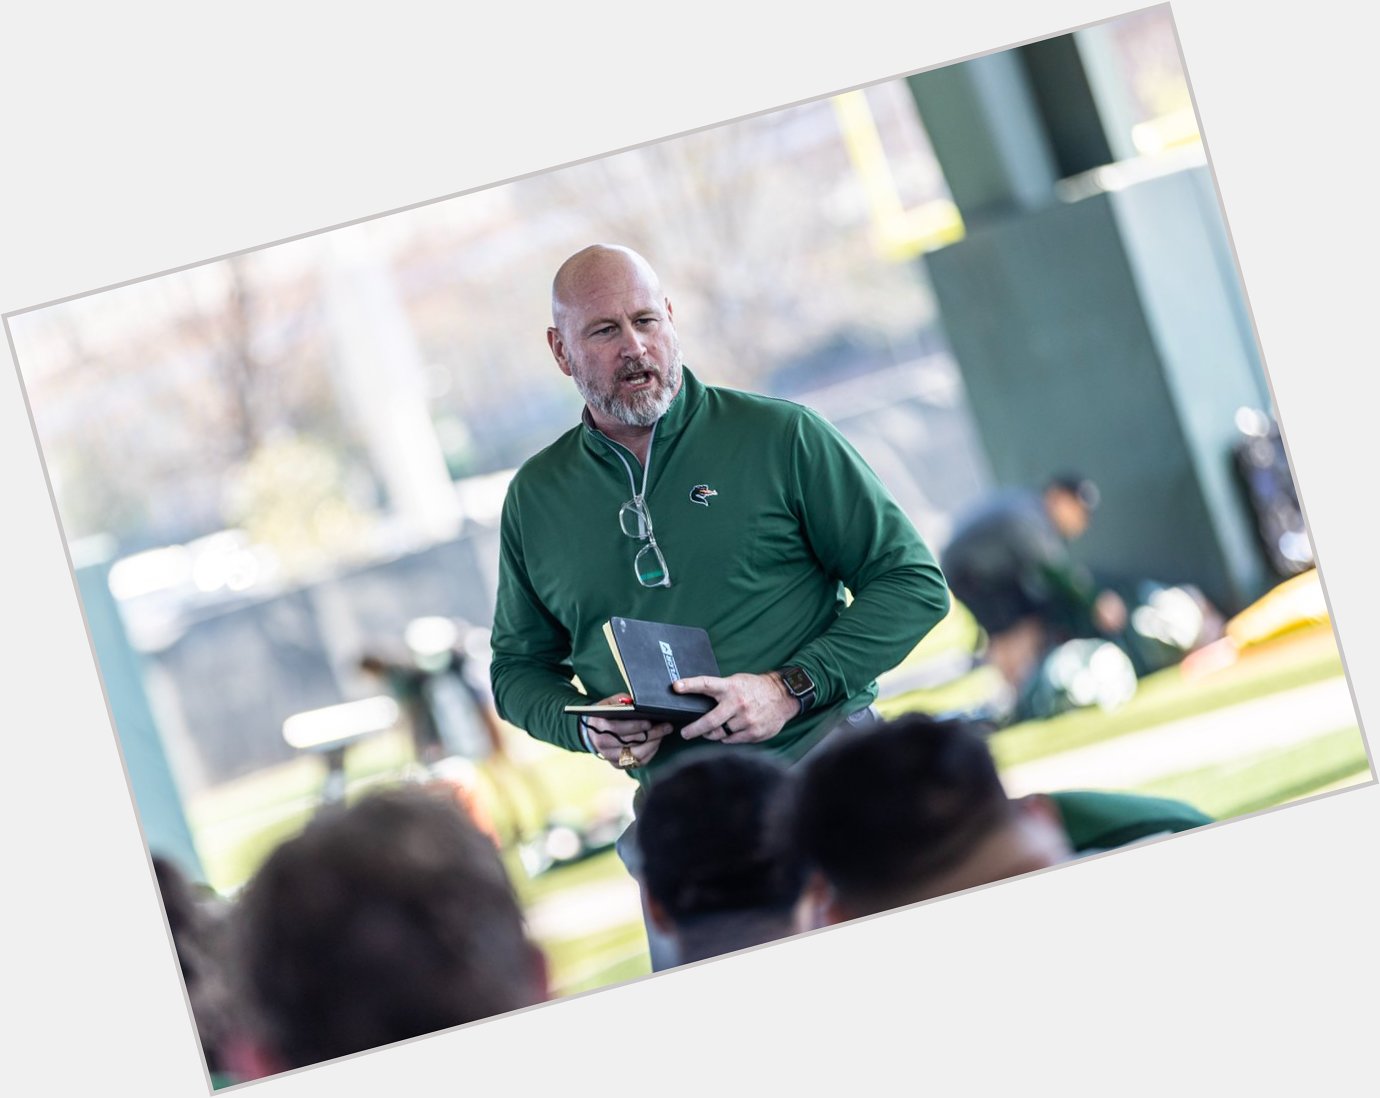 Join us in wishing Head Coach Trent Dilfer a very Happy Birthday     